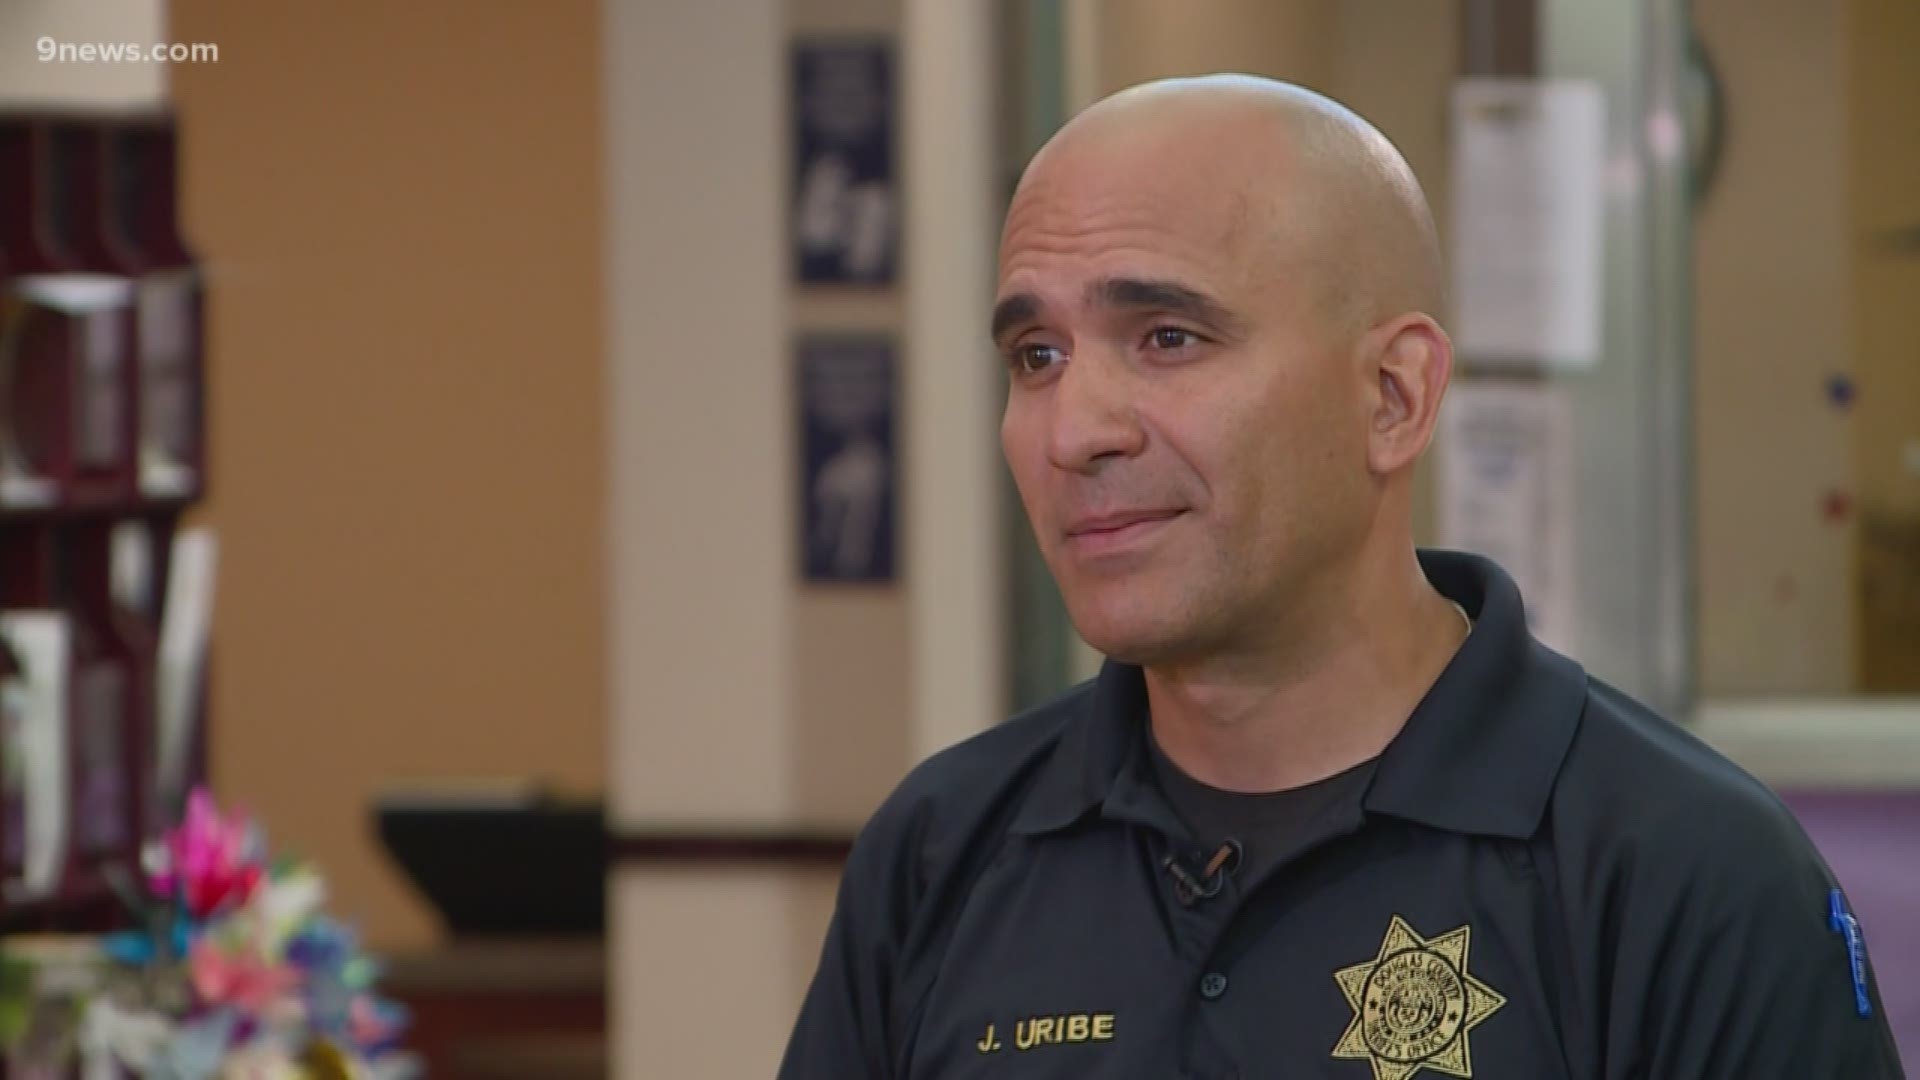 Students at STEM School Highlands Ranch are headed back to class on Wednesday morning. Ahead of their return, 9NEWS spoke with the school resource officer (SRO) recently assigned to the school.